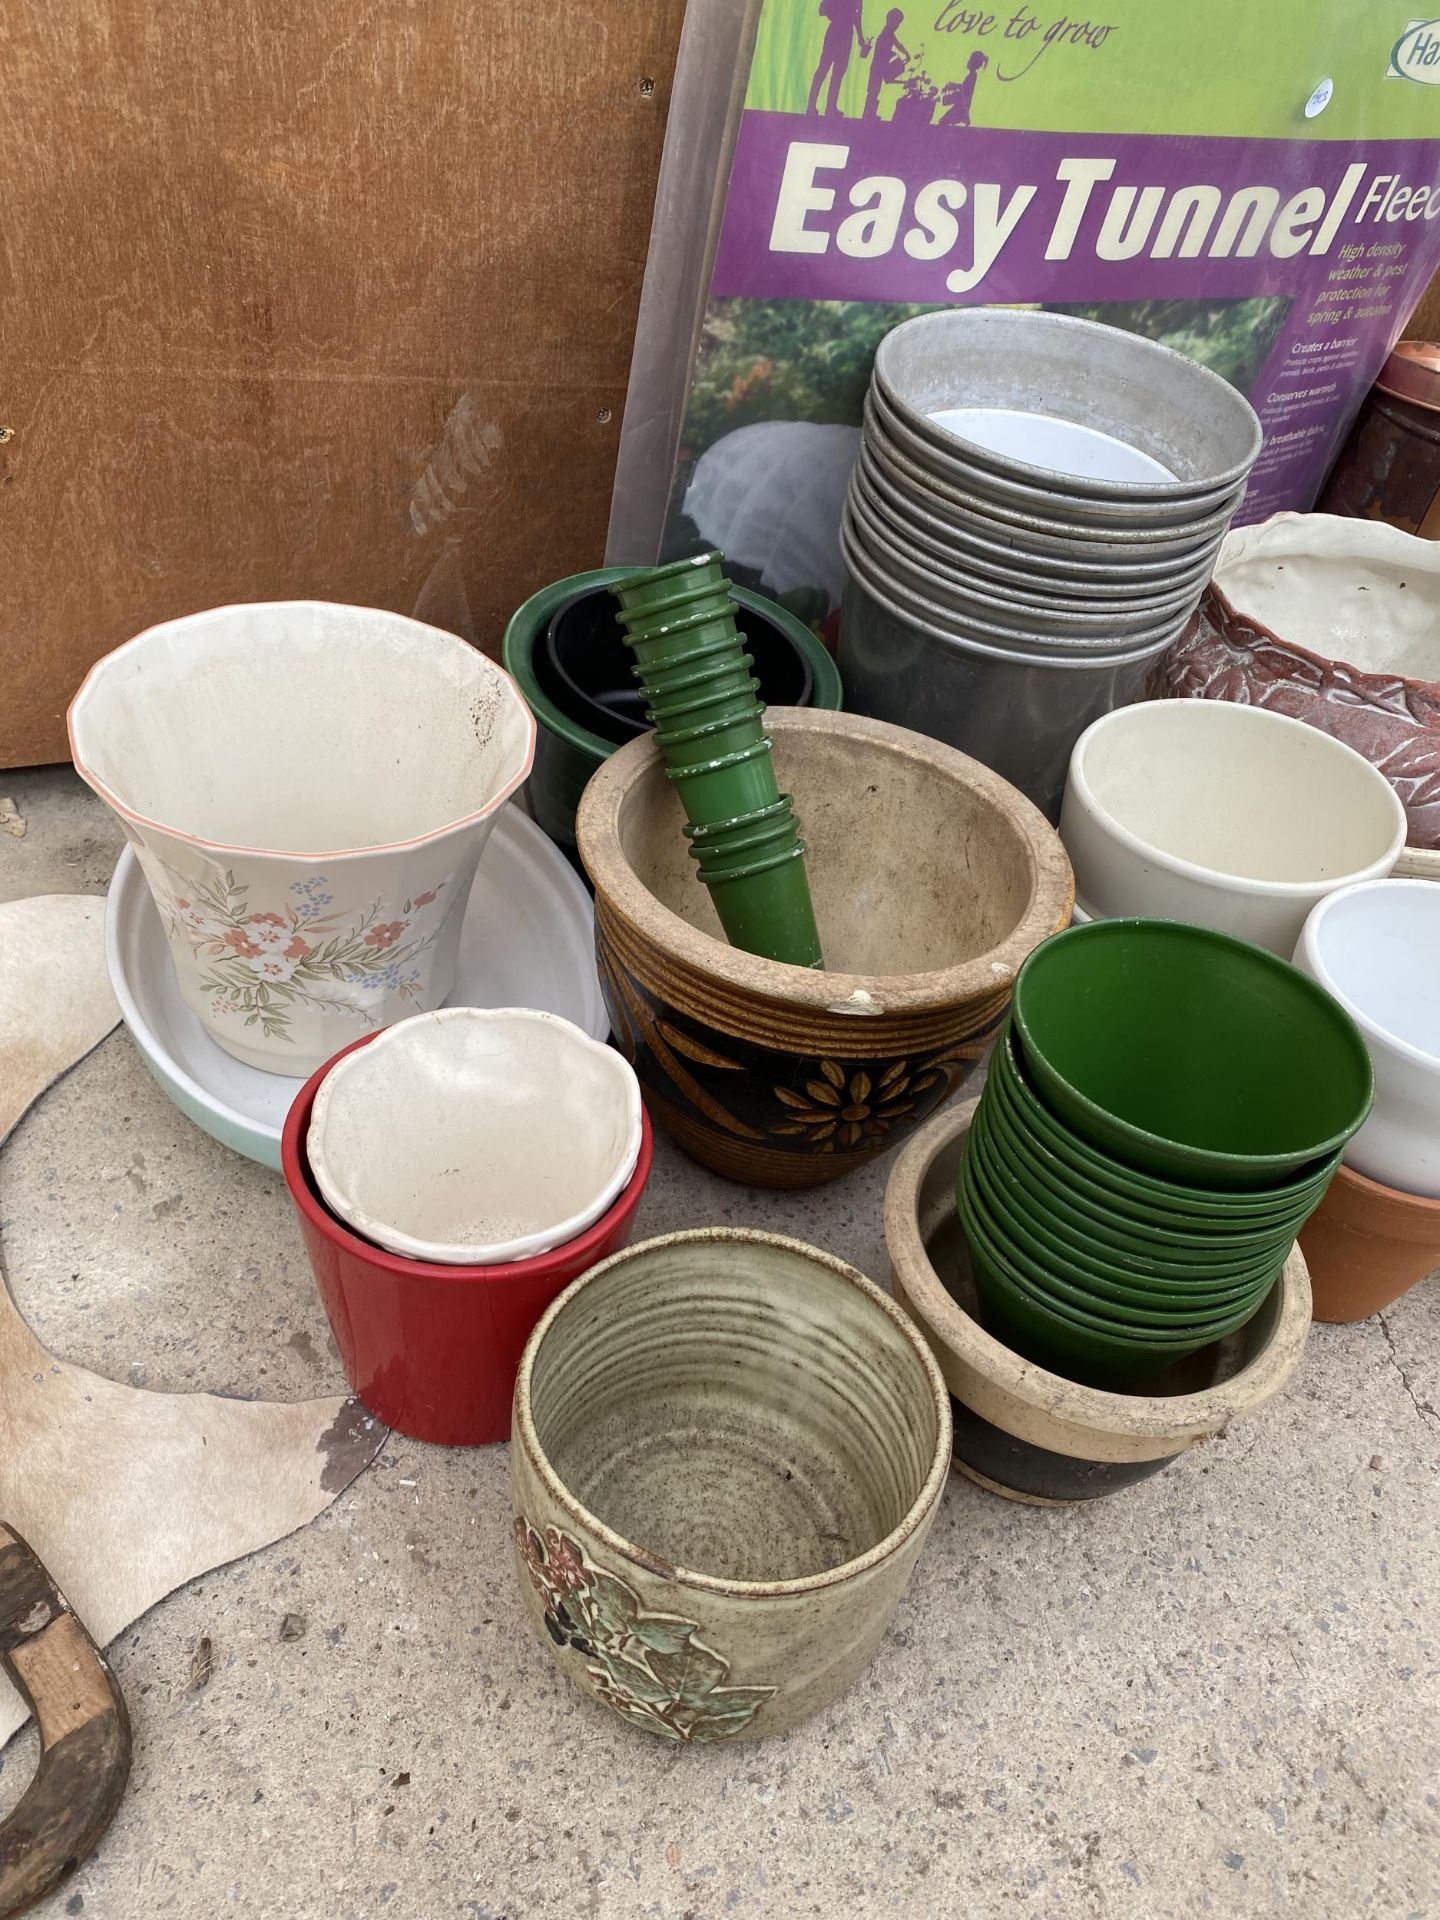 A LARGE ASSORTMENT OF VARIOUS PLANTERS AND PLANT POTS - Image 2 of 5